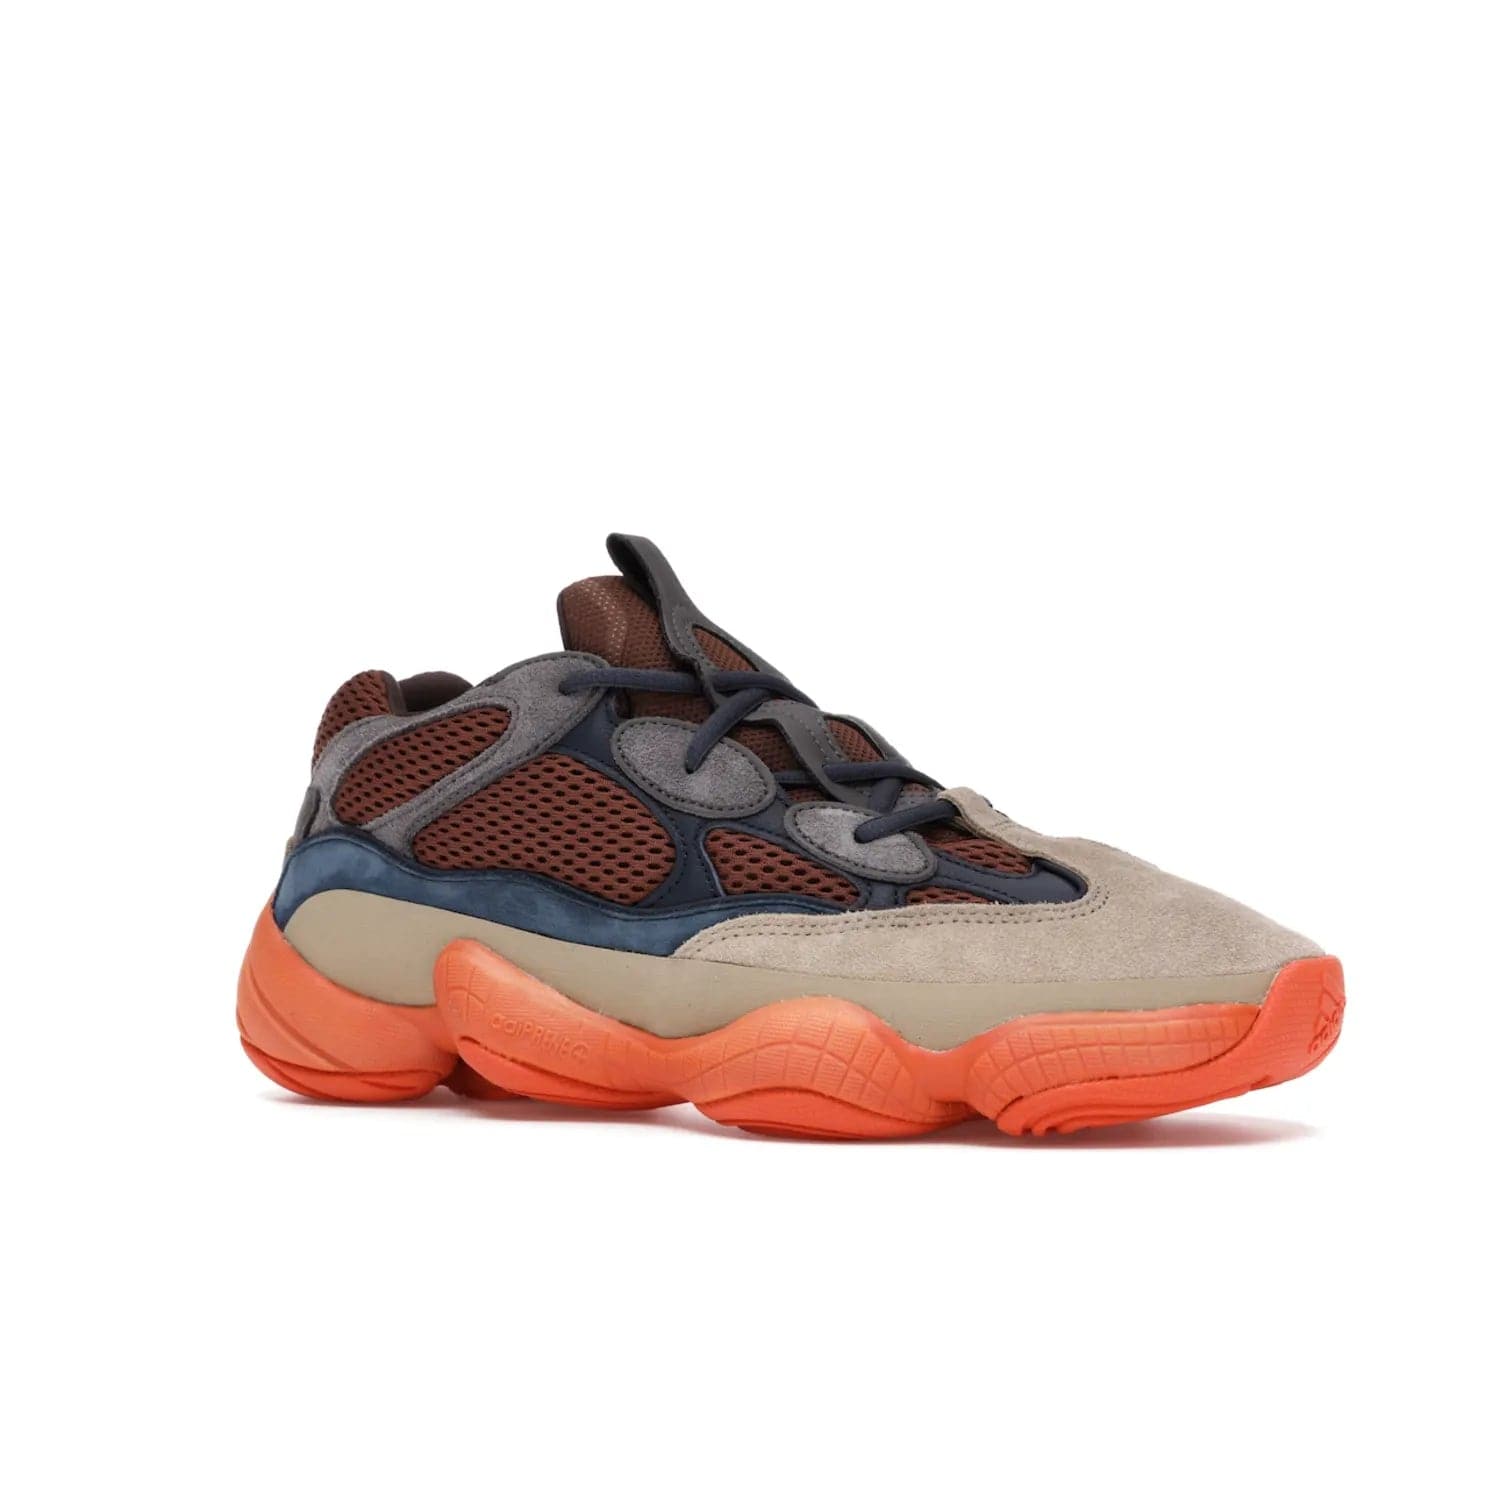 adidas Yeezy 500 Enflame - Image 4 - Only at www.BallersClubKickz.com - Step into style with the adidas Yeezy 500 Enflame. Mix of mesh, leather, and suede layered together to create tonal-brown, dark blue, & orange. Orange AdiPRENE sole provides superior cushioning & comfort. Get yours and experience maximum style.